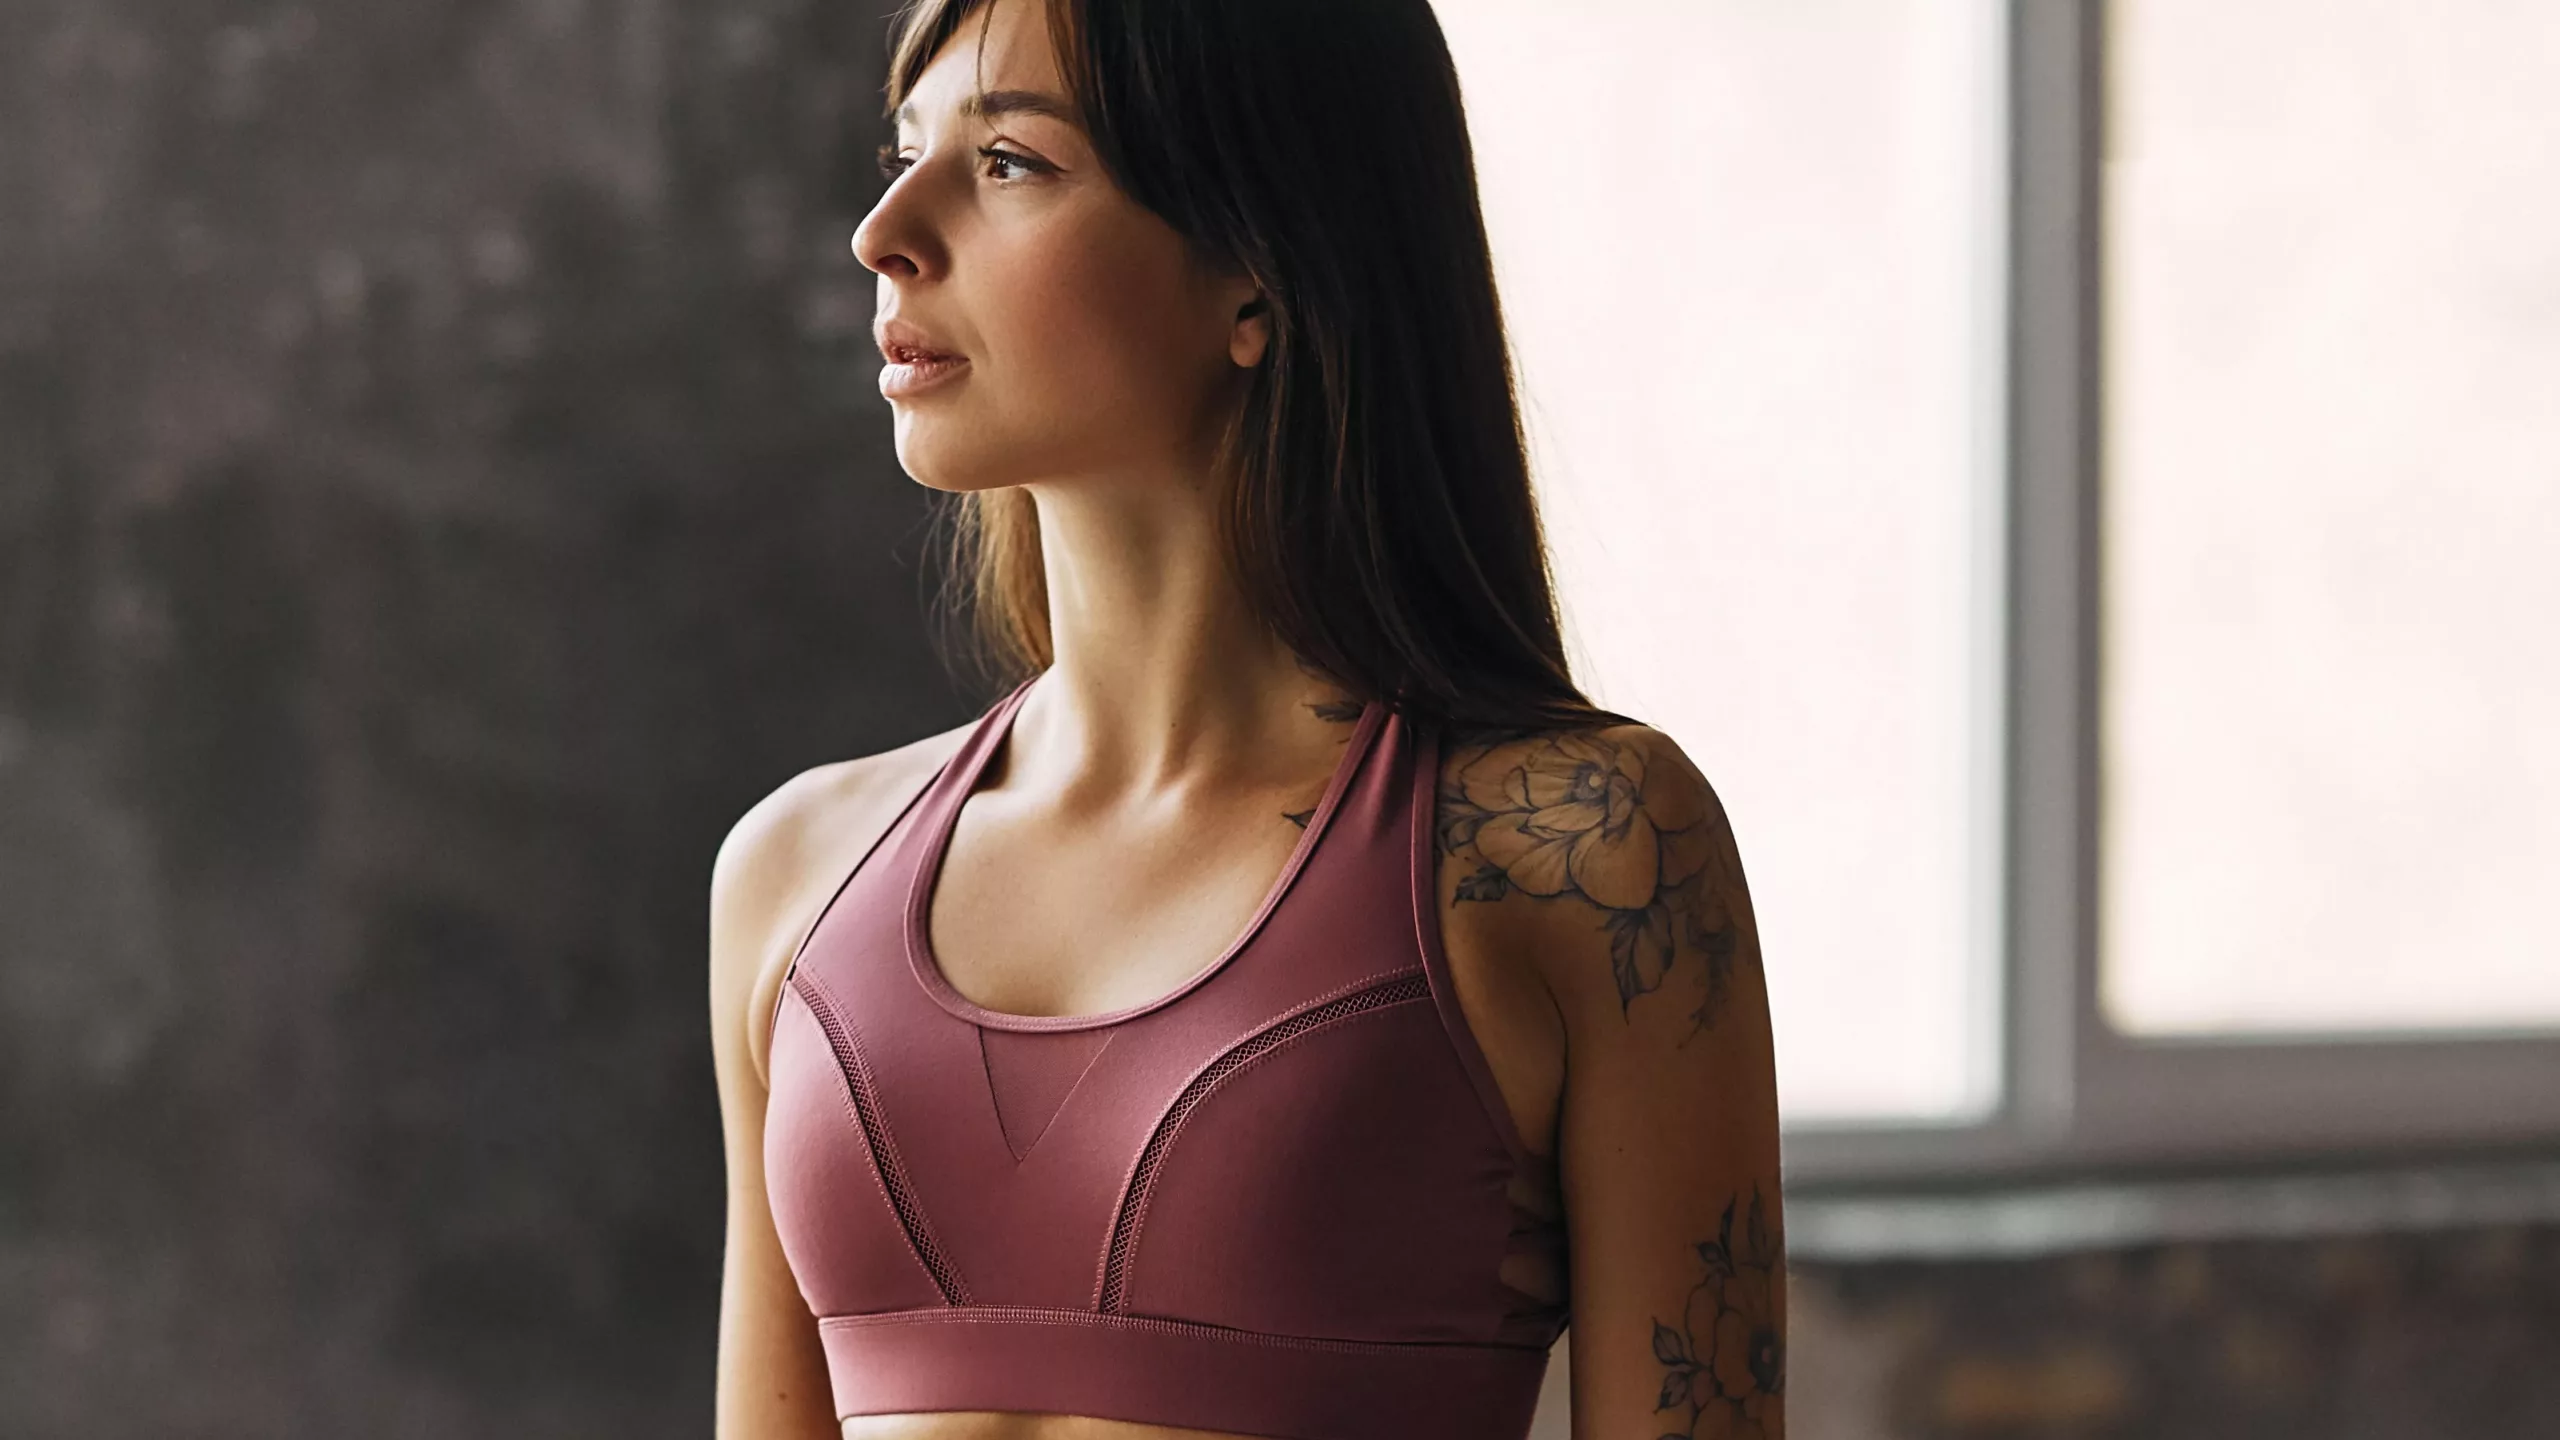 22x (!!!) the safe limit of BPA was just found in sports bras and athl